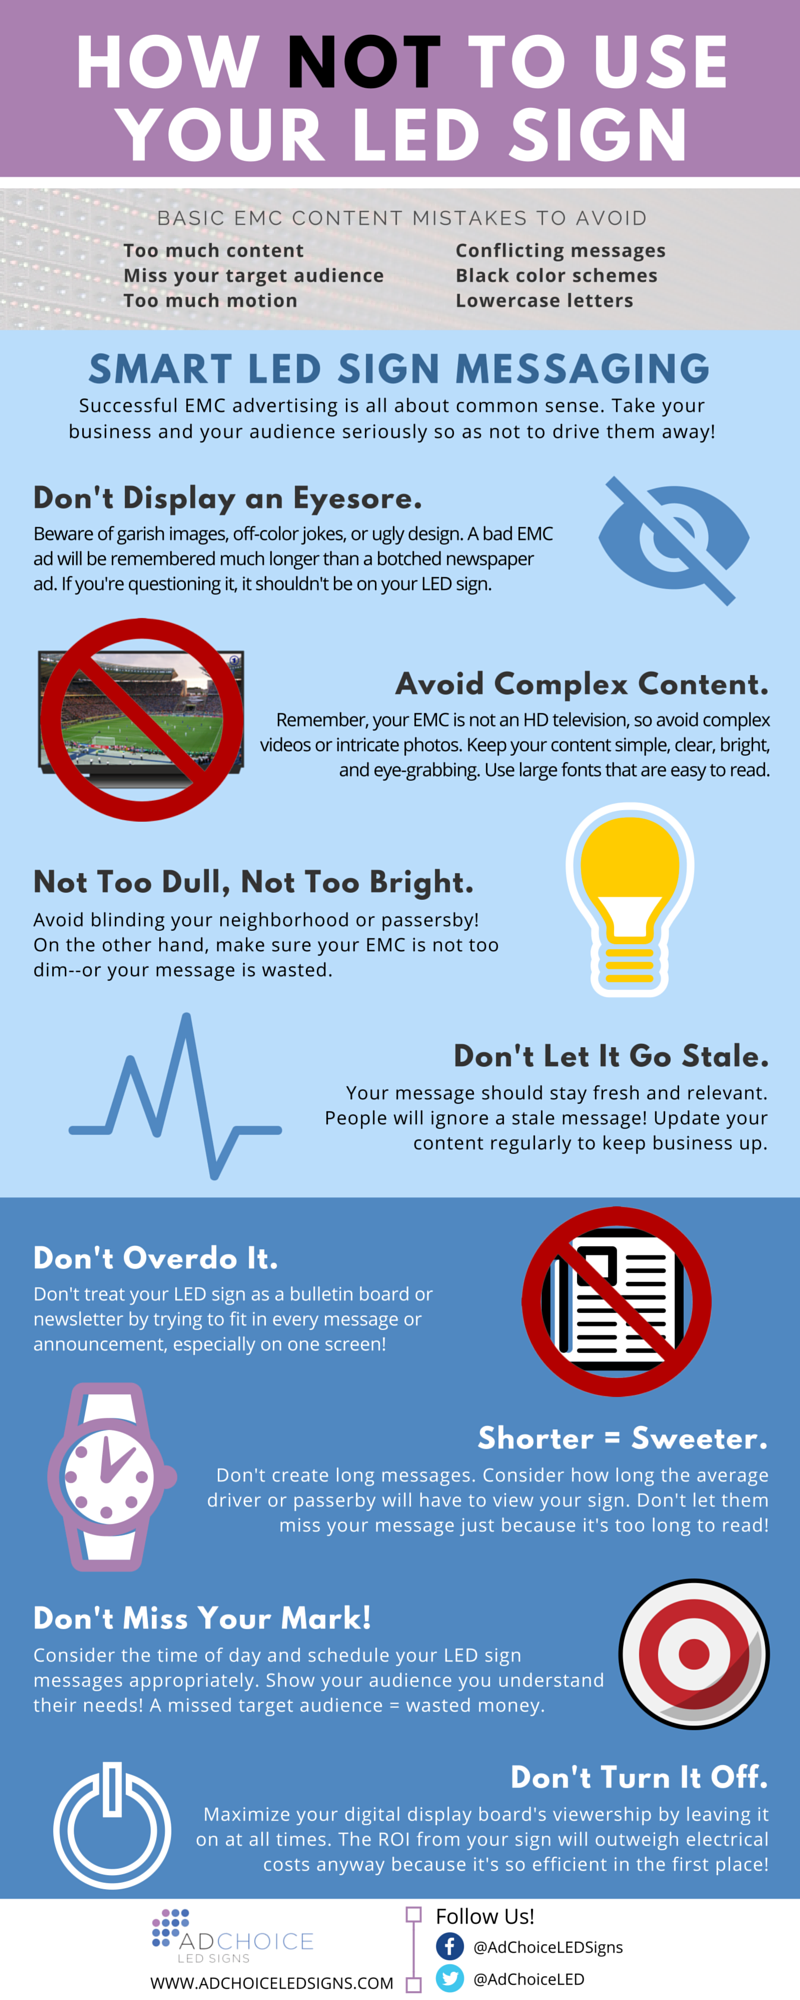 How Not To Use Your LED Sign [Infographic]